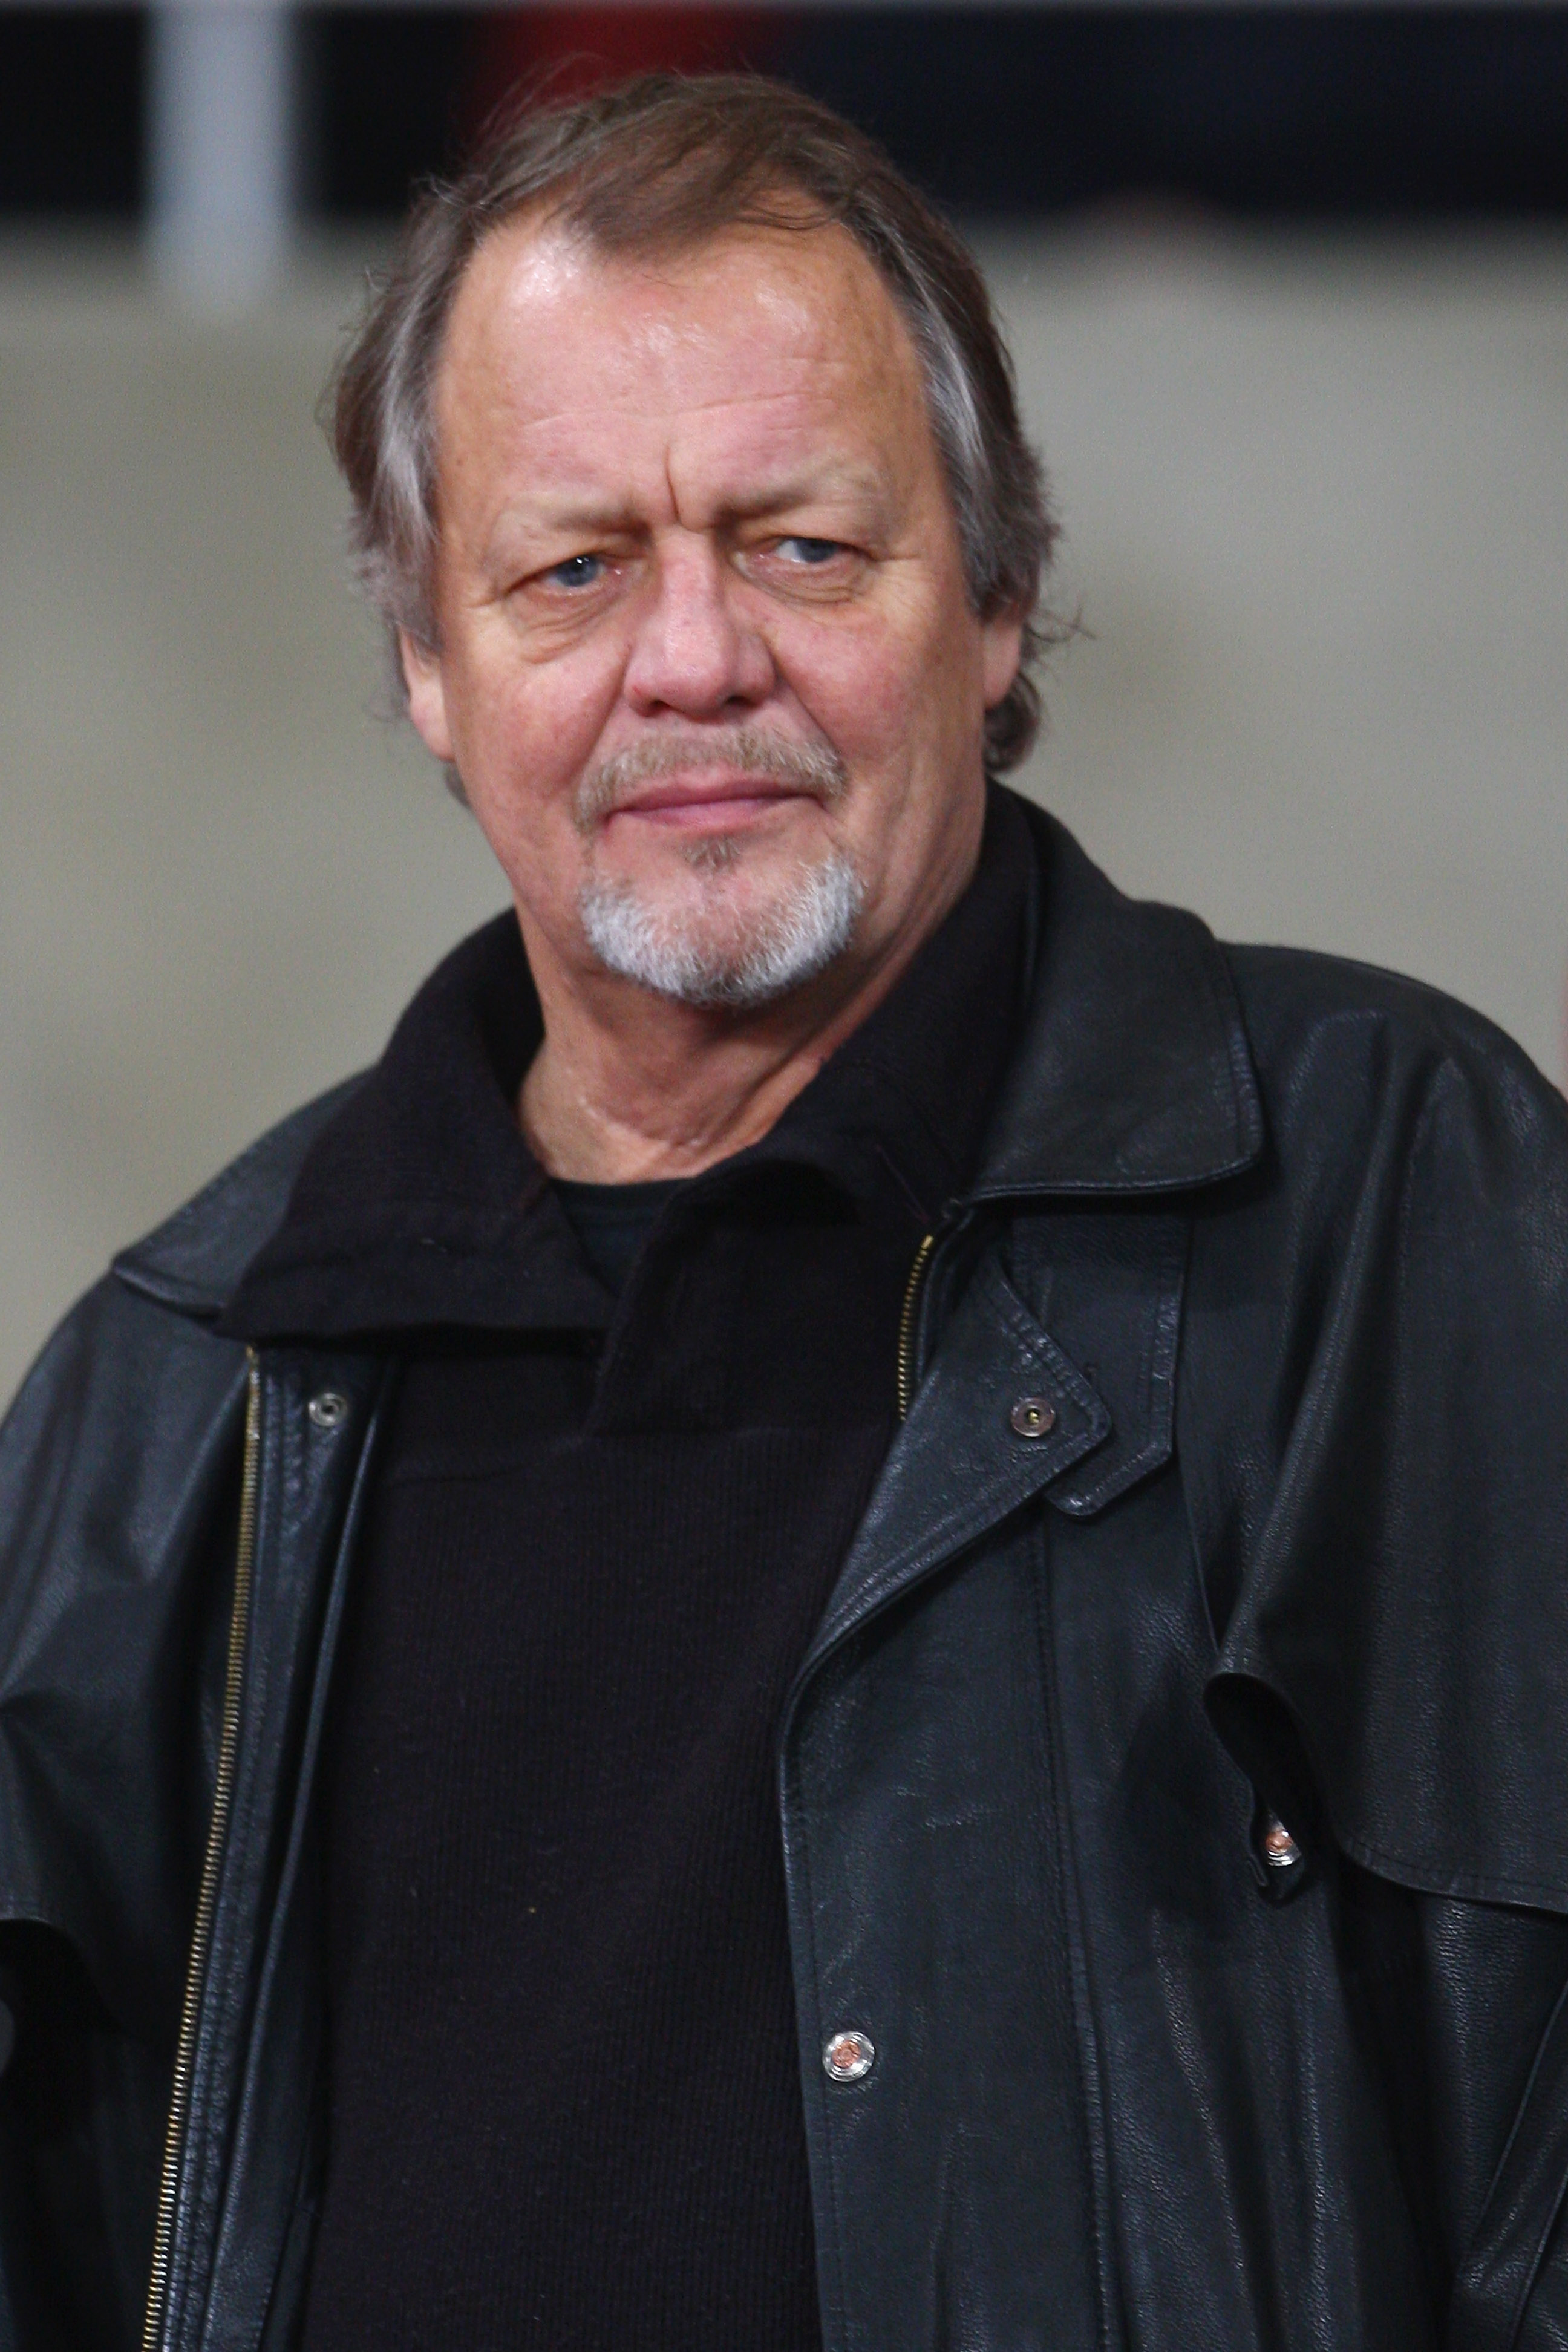 David Soul attends the UEFA Champions League Group G match between Arsenal and Fenerbahce on November 5, 2008 in London, England | Source: Getty Images